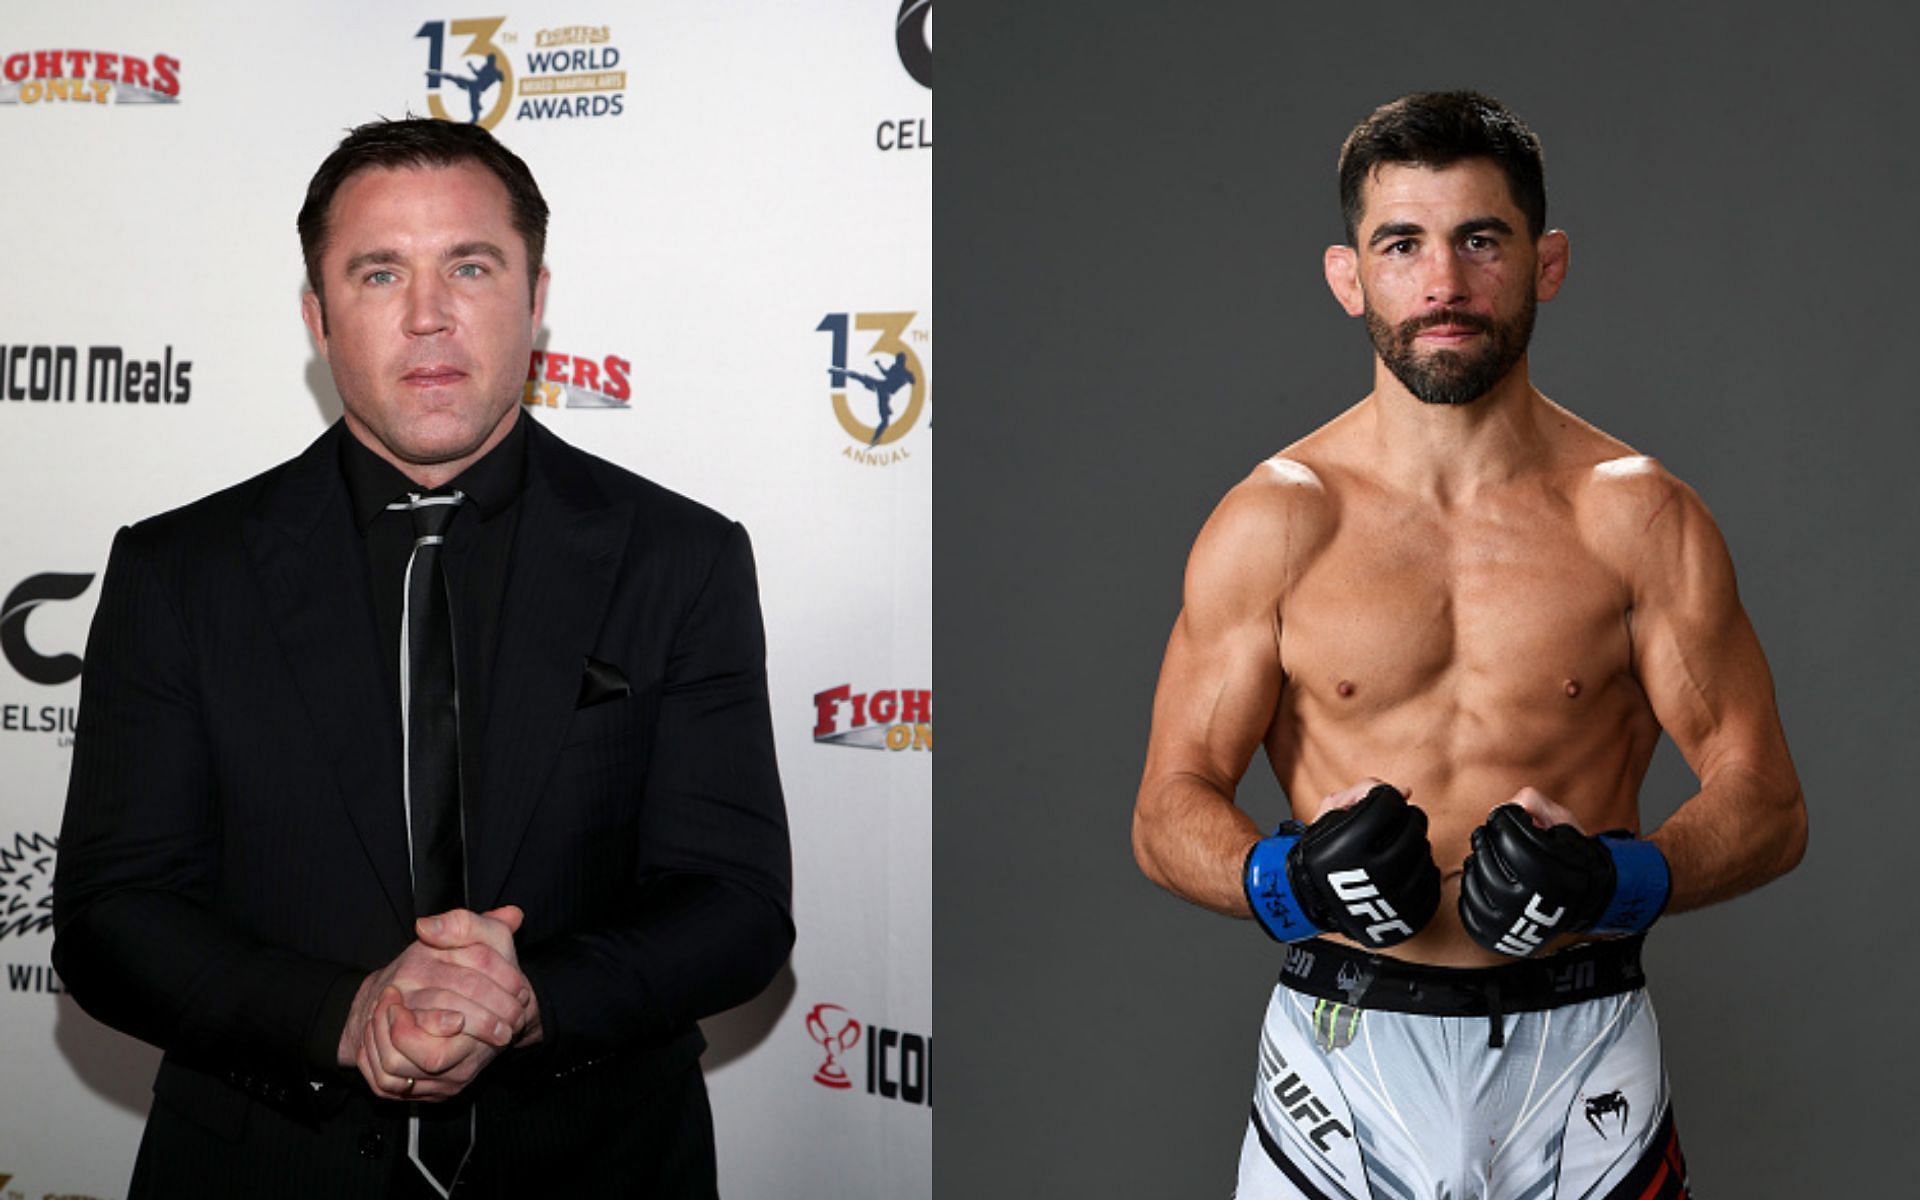 Chael Sonnen (left) and Dominick Cruz (right)